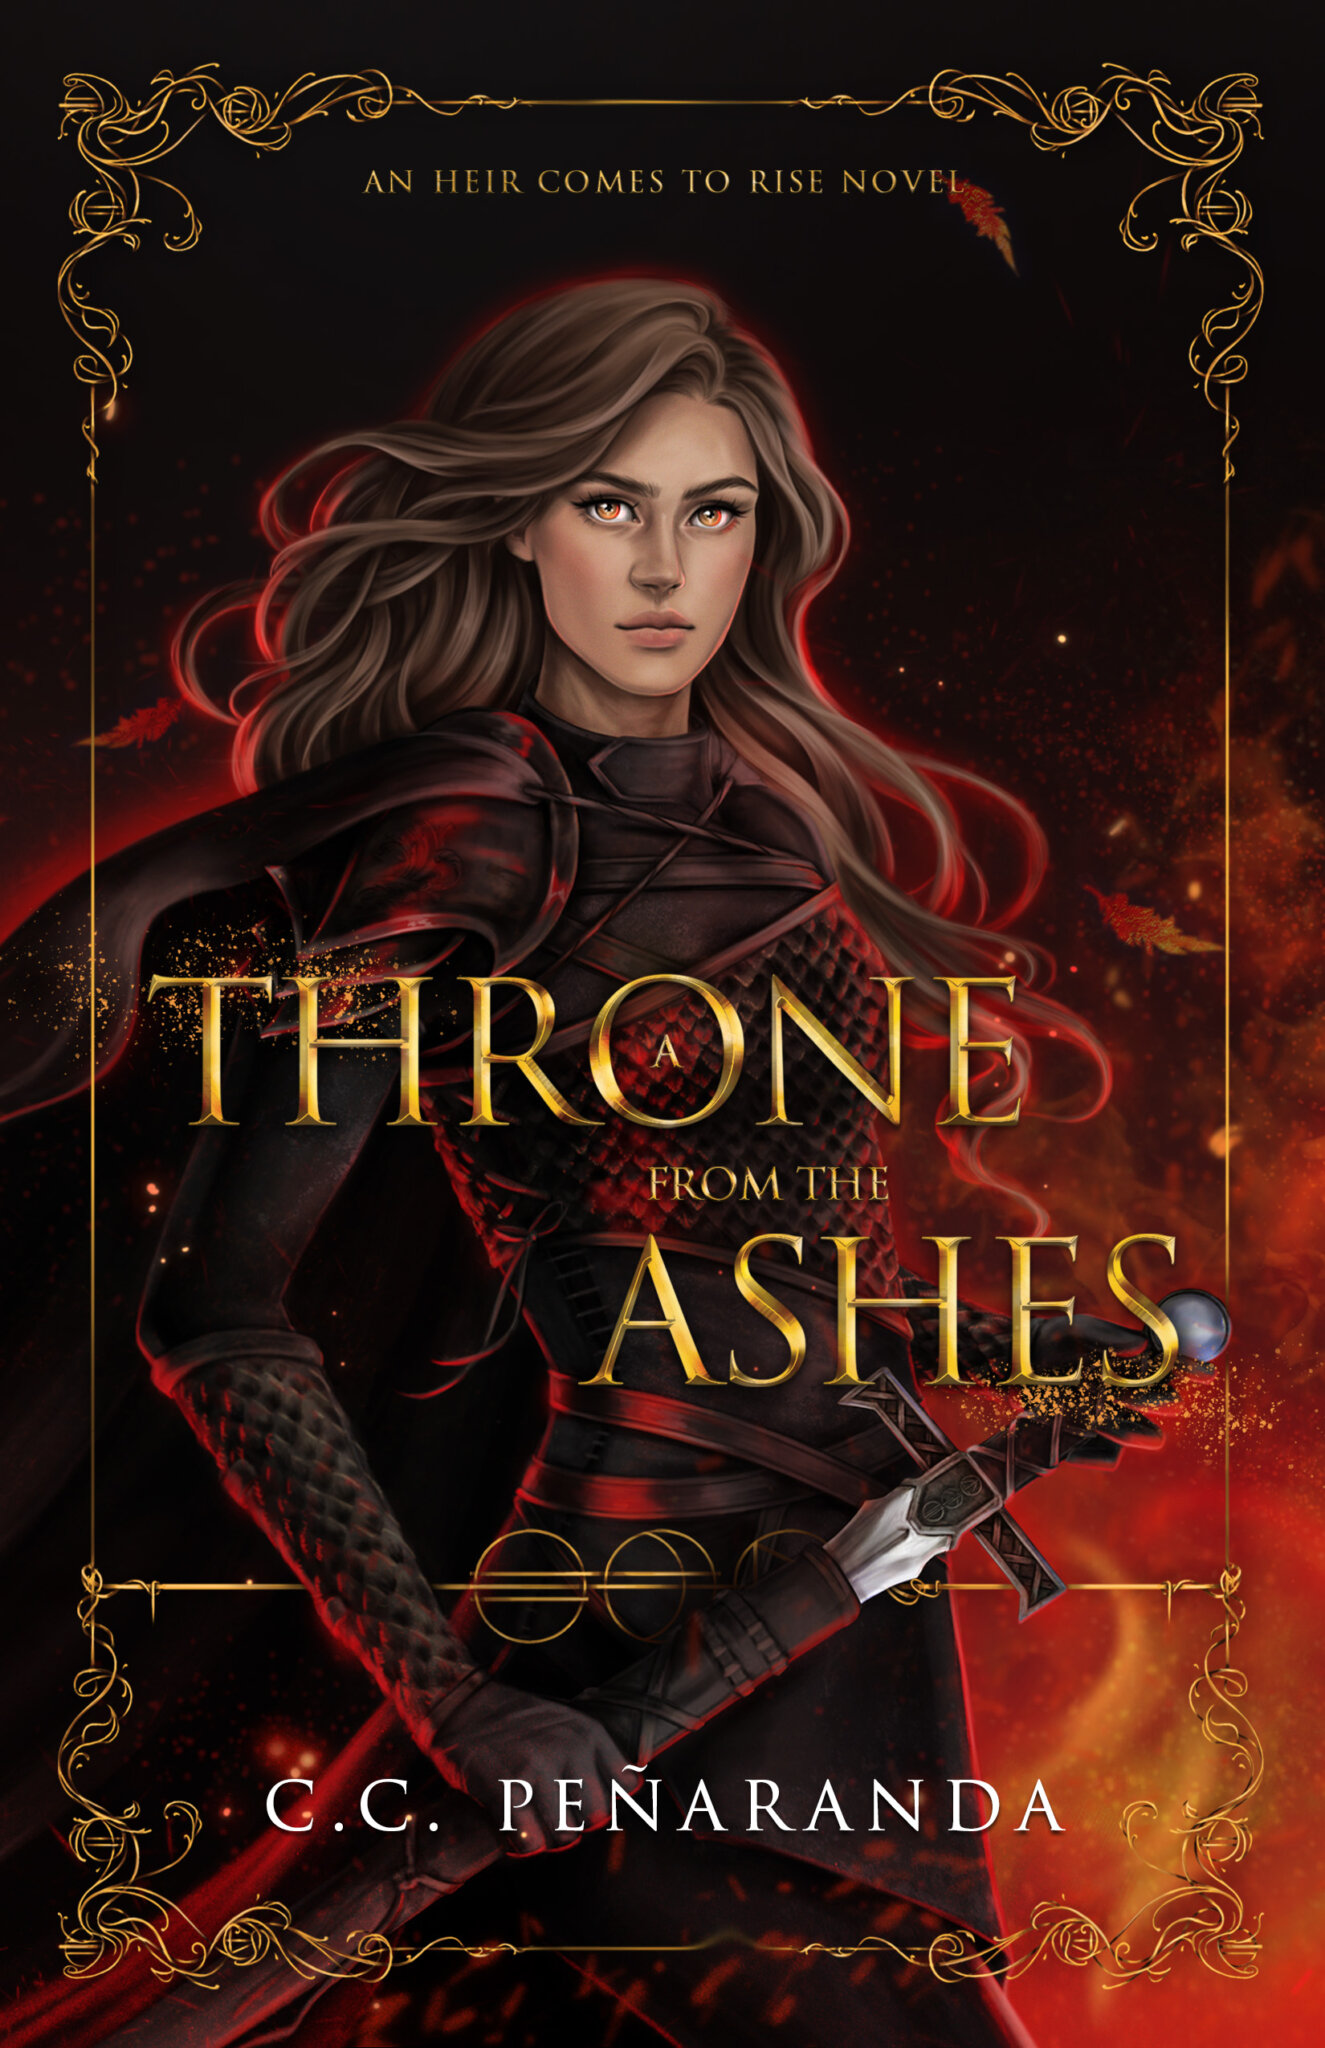 A Throne From the Ashes by C.C. Peñaranda